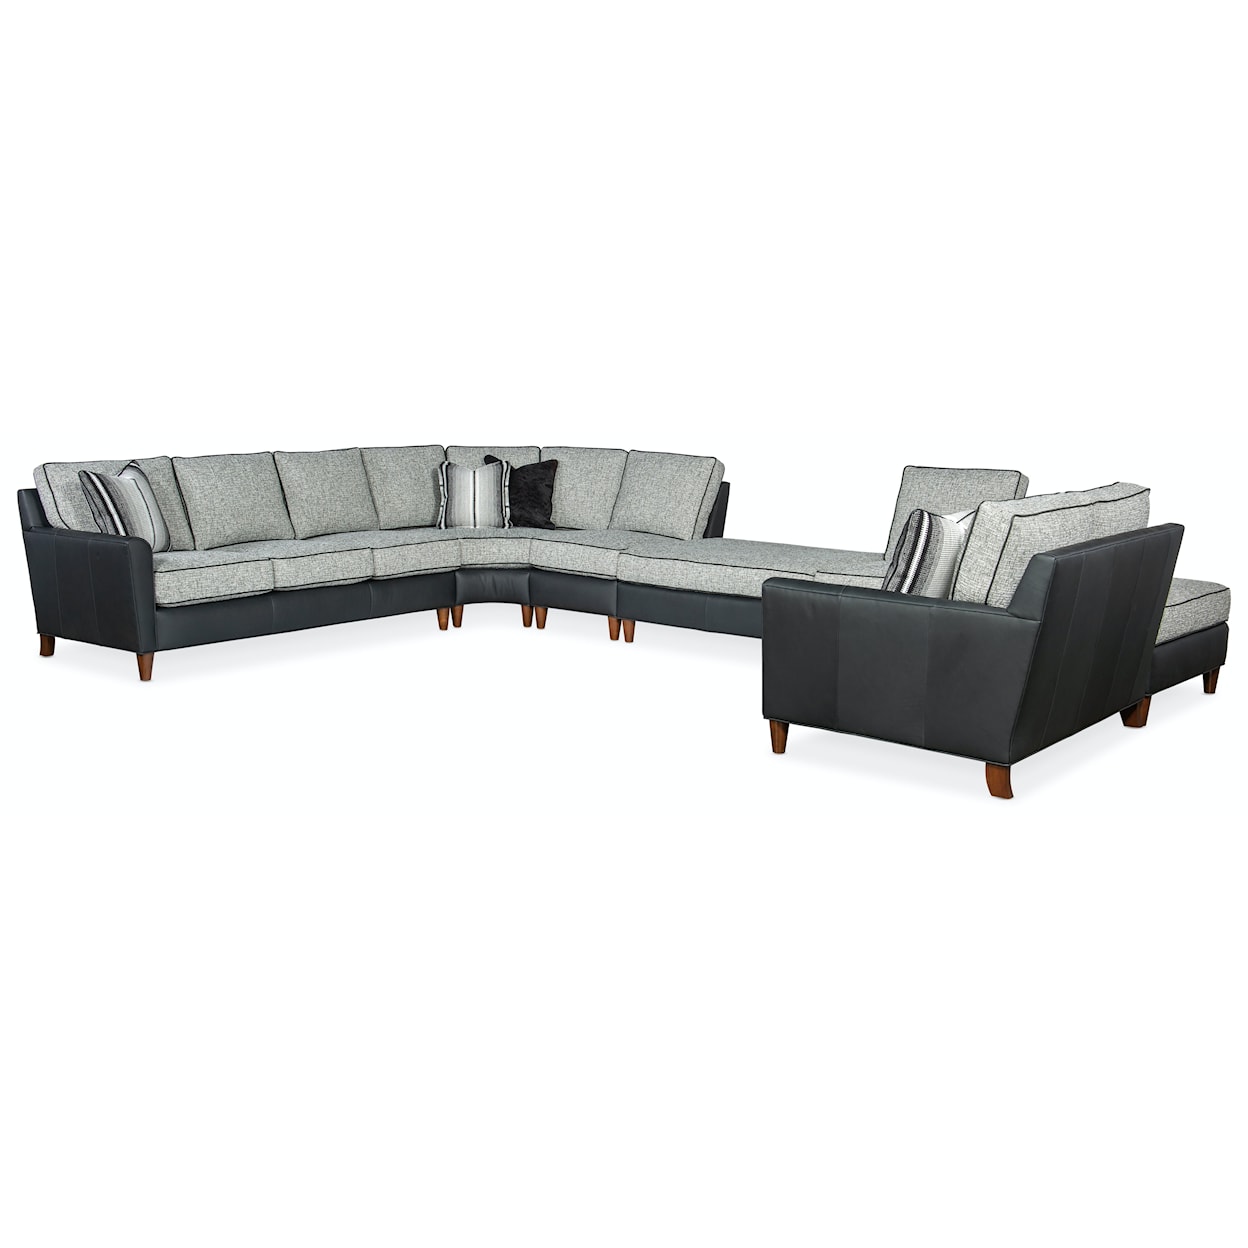 Bradington Young Manning 7-Seat Sectional Sofa w/ 2 Ottomans